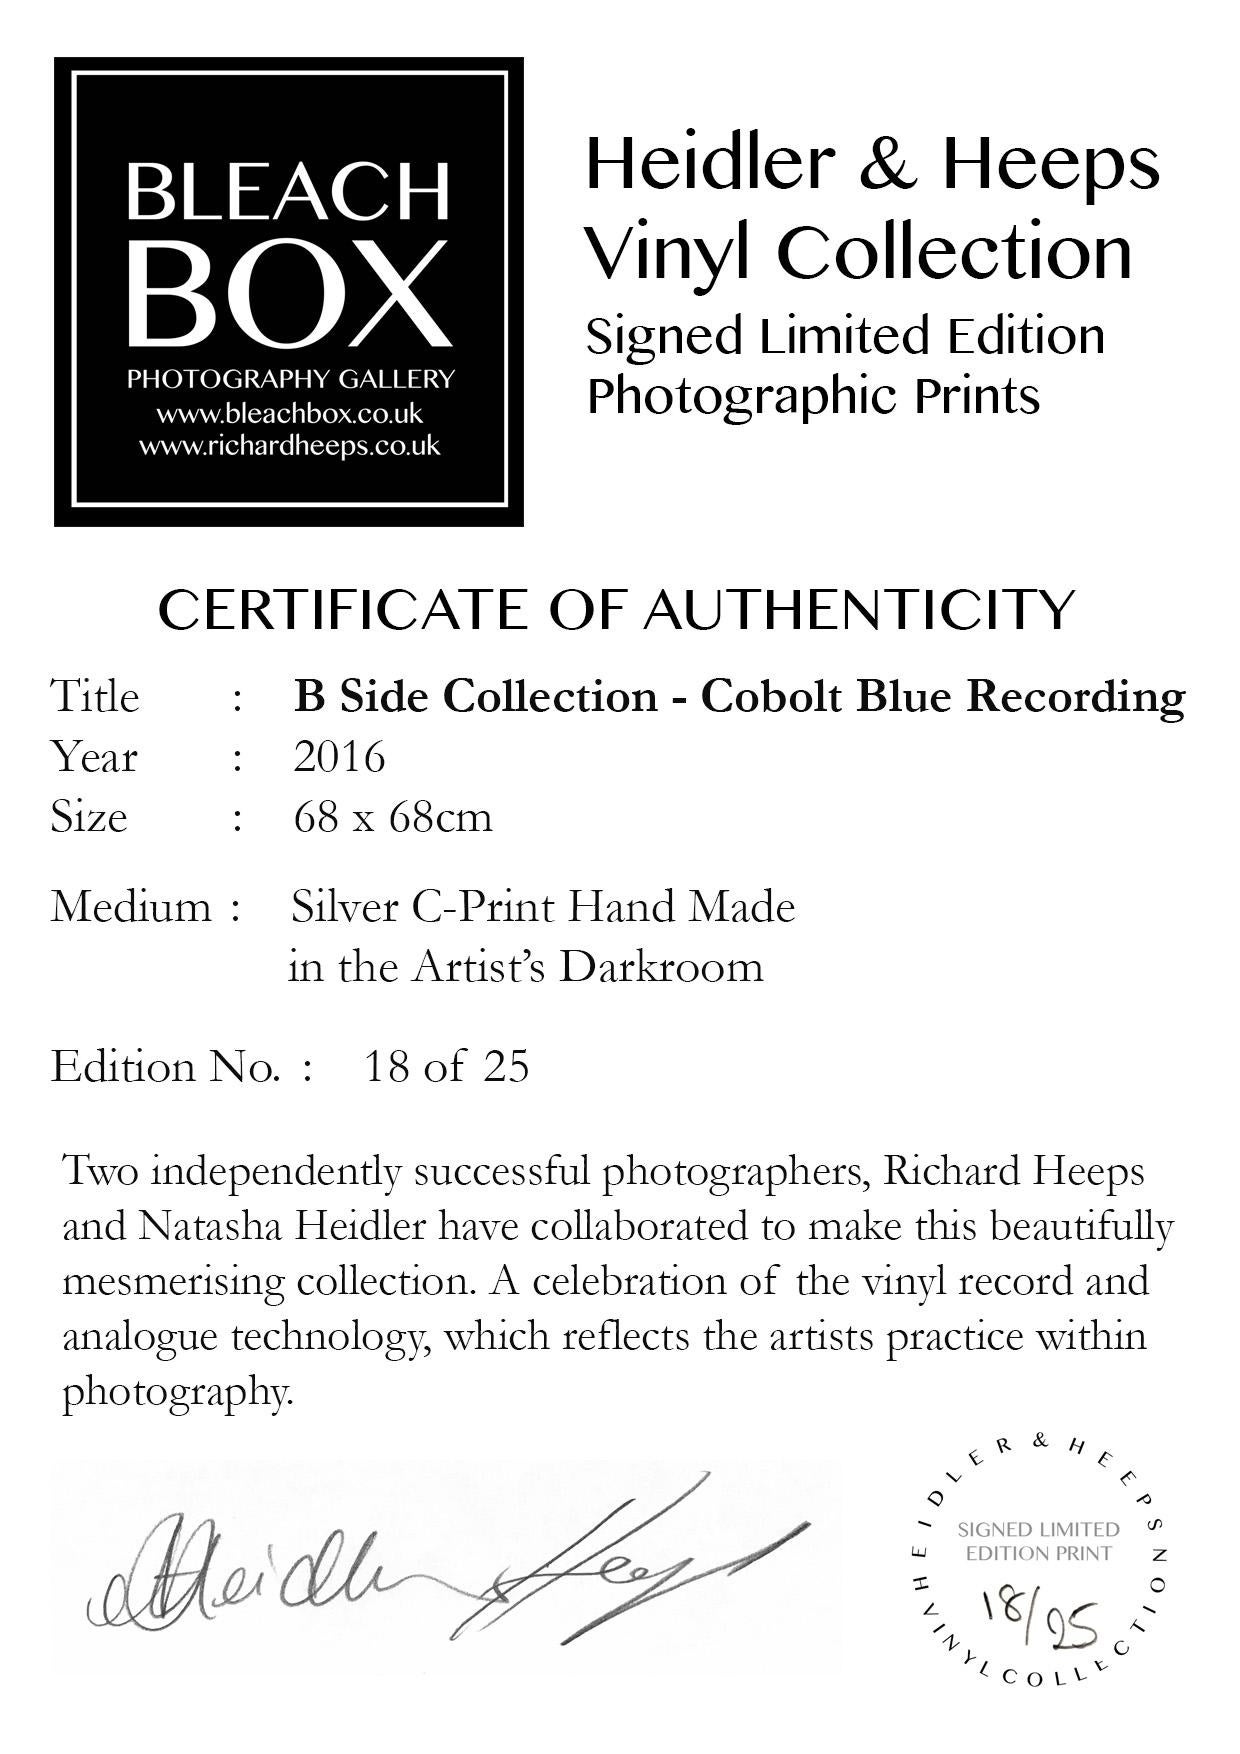 Cobolt Blue Recording, a deep blue artwork in the Heidler & Heeps B Side Vinyl Collection.
Acclaimed contemporary photographers, Richard Heeps and Natasha Heidler have collaborated to make this beautifully mesmerising collection. A celebration of